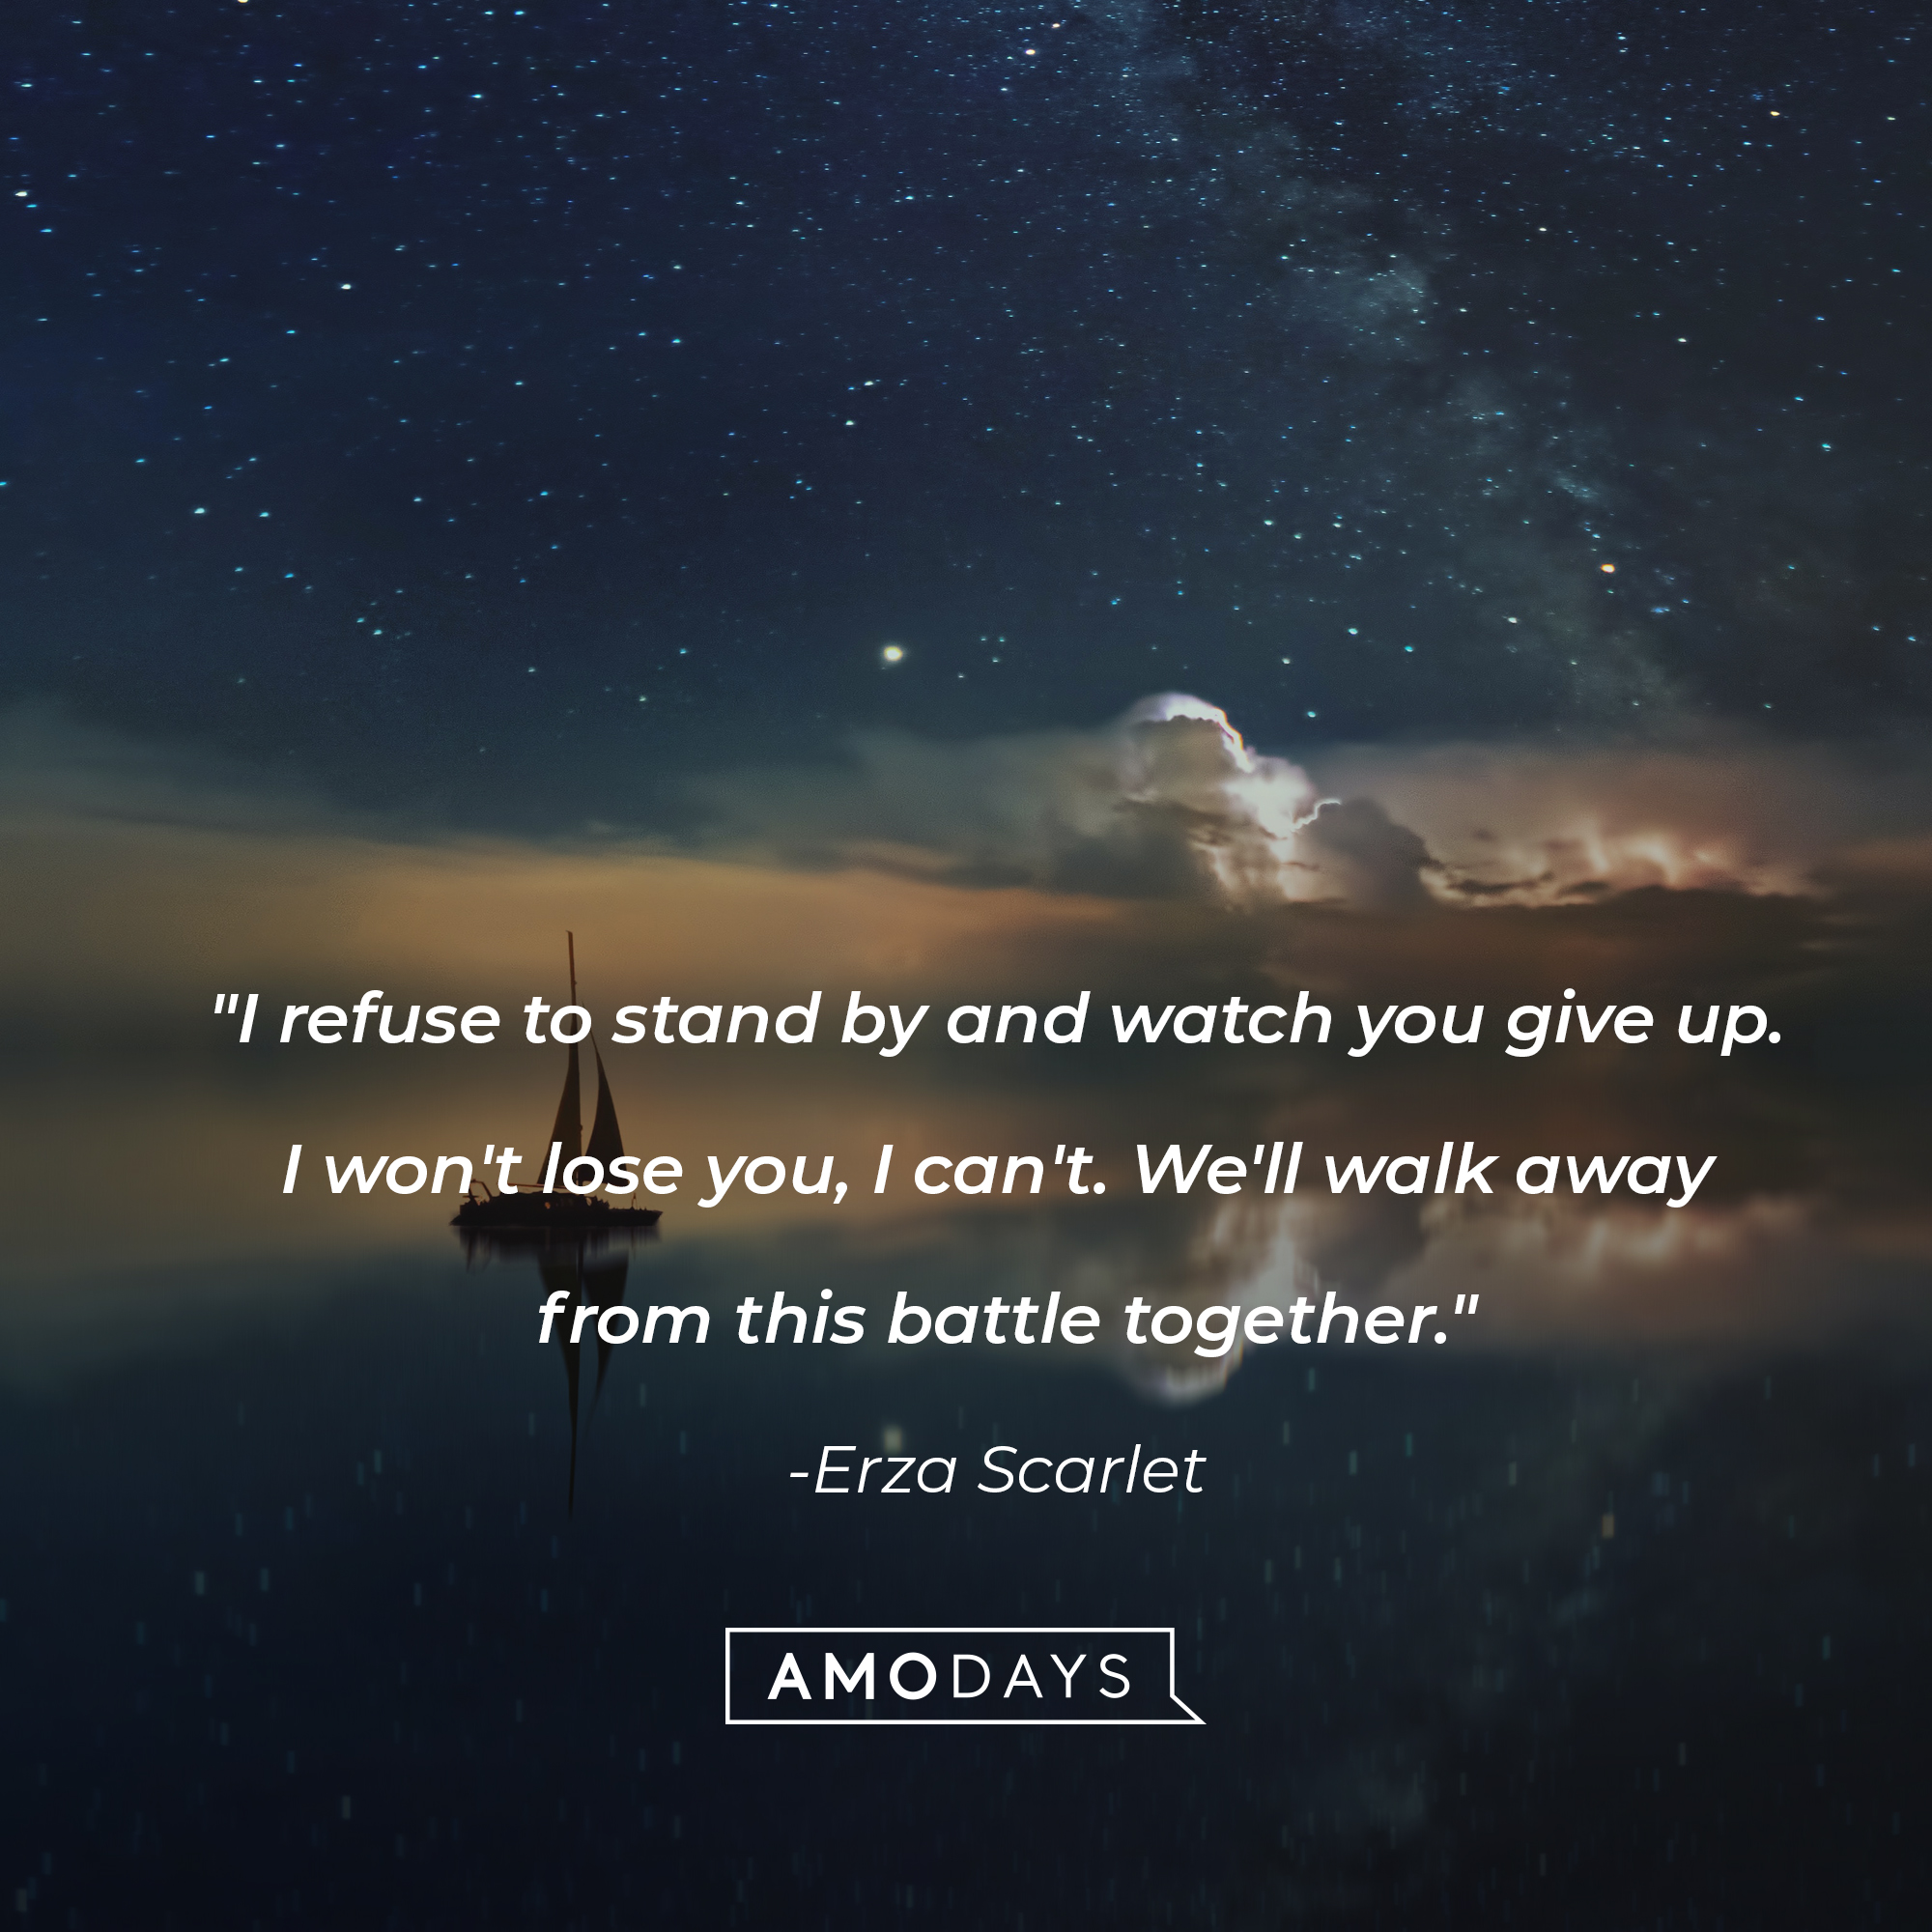 Erza Scarlet's quote: "I refuse to stand by and watch you give up. I won't lose you, I can't. We'll walk away from this battle together." | Image: Unsplash